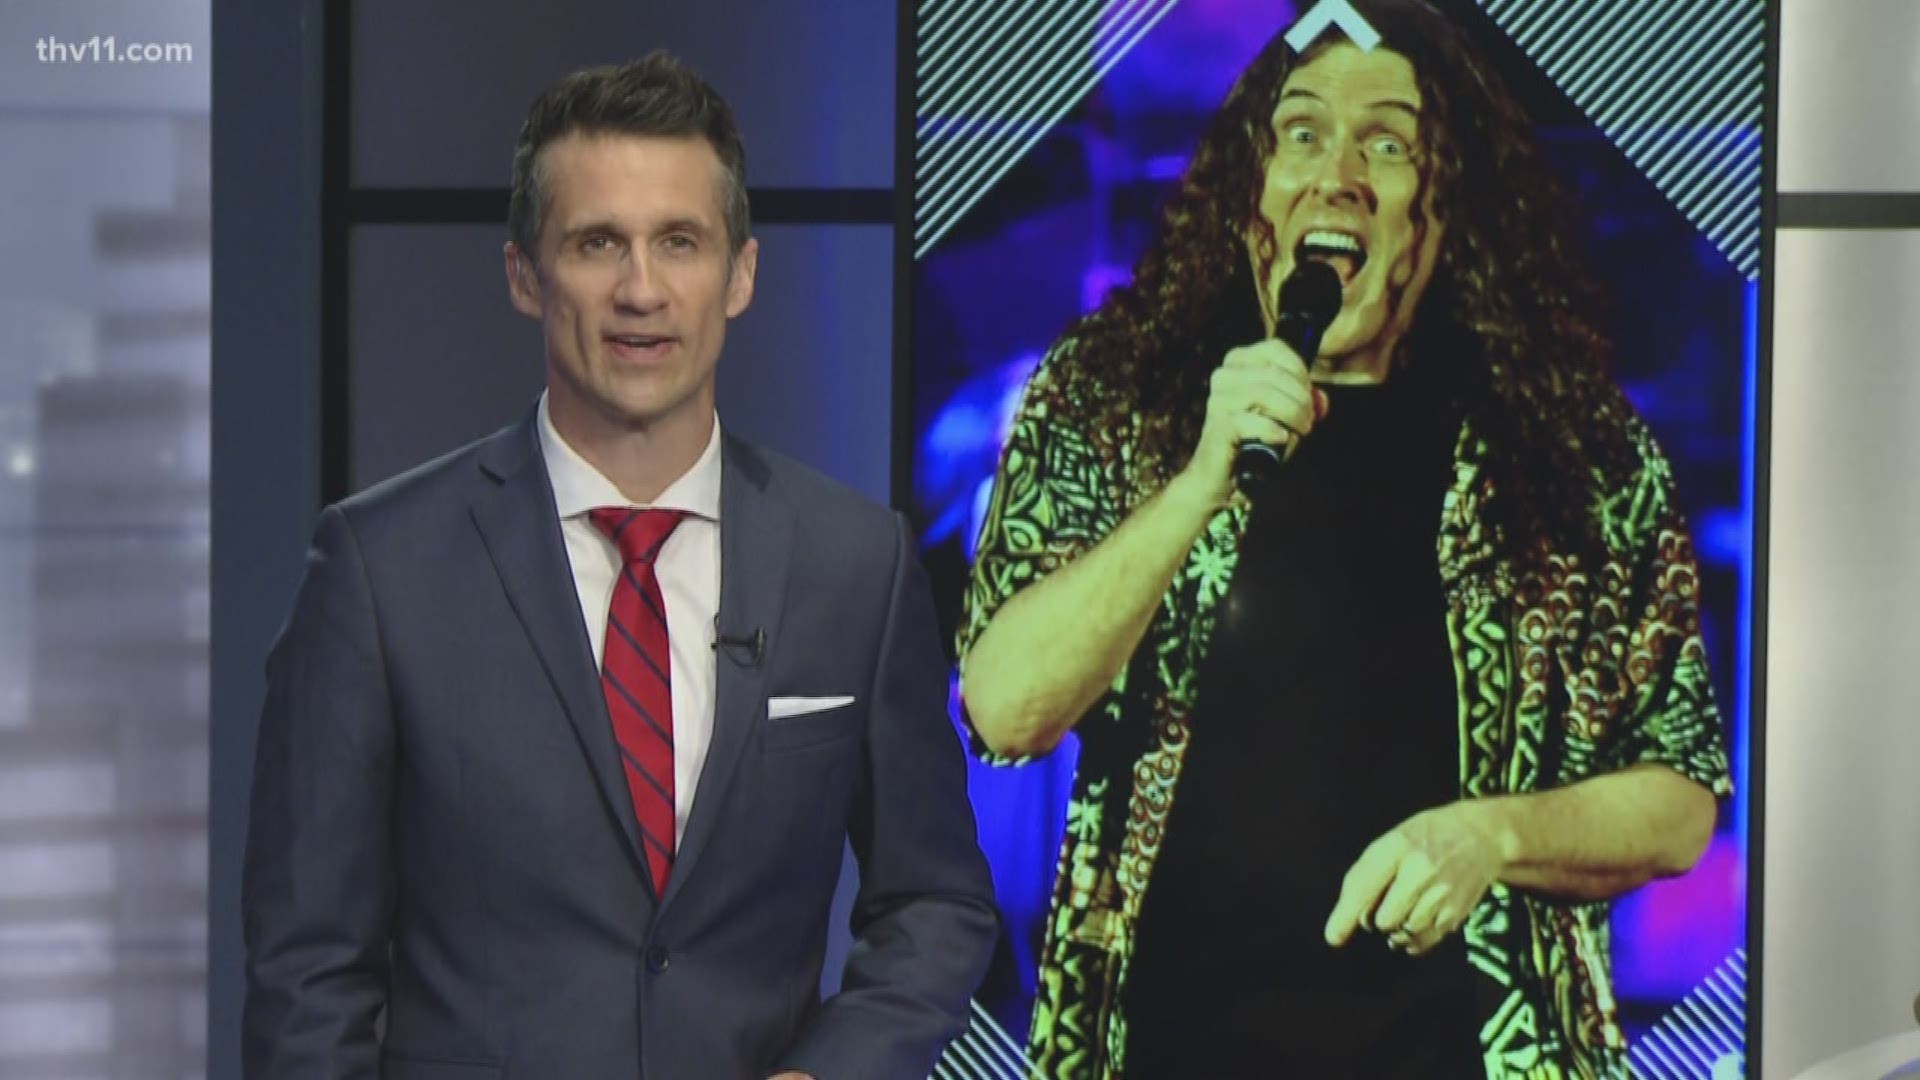 One long time fan was took sick to make it to the Weird Al Yankovic concert, but as it turns out, what happened to him was even better!